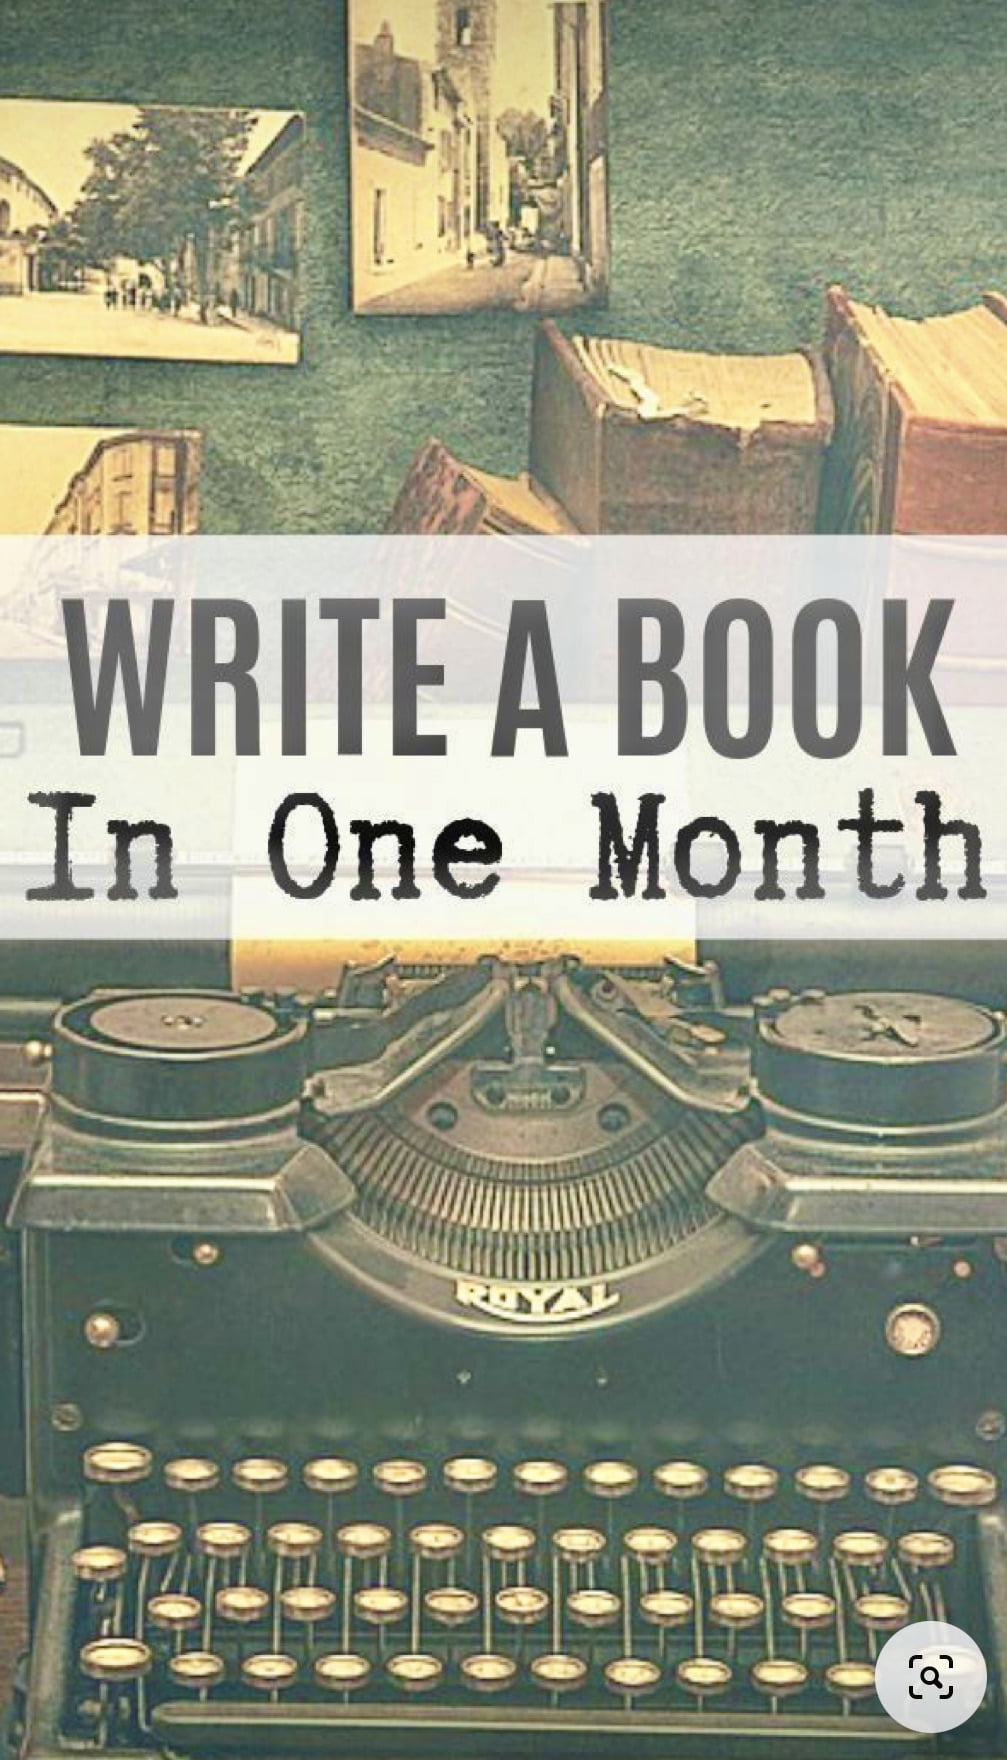 THE END OF NATIONAL NOVEL WRITING MONTH